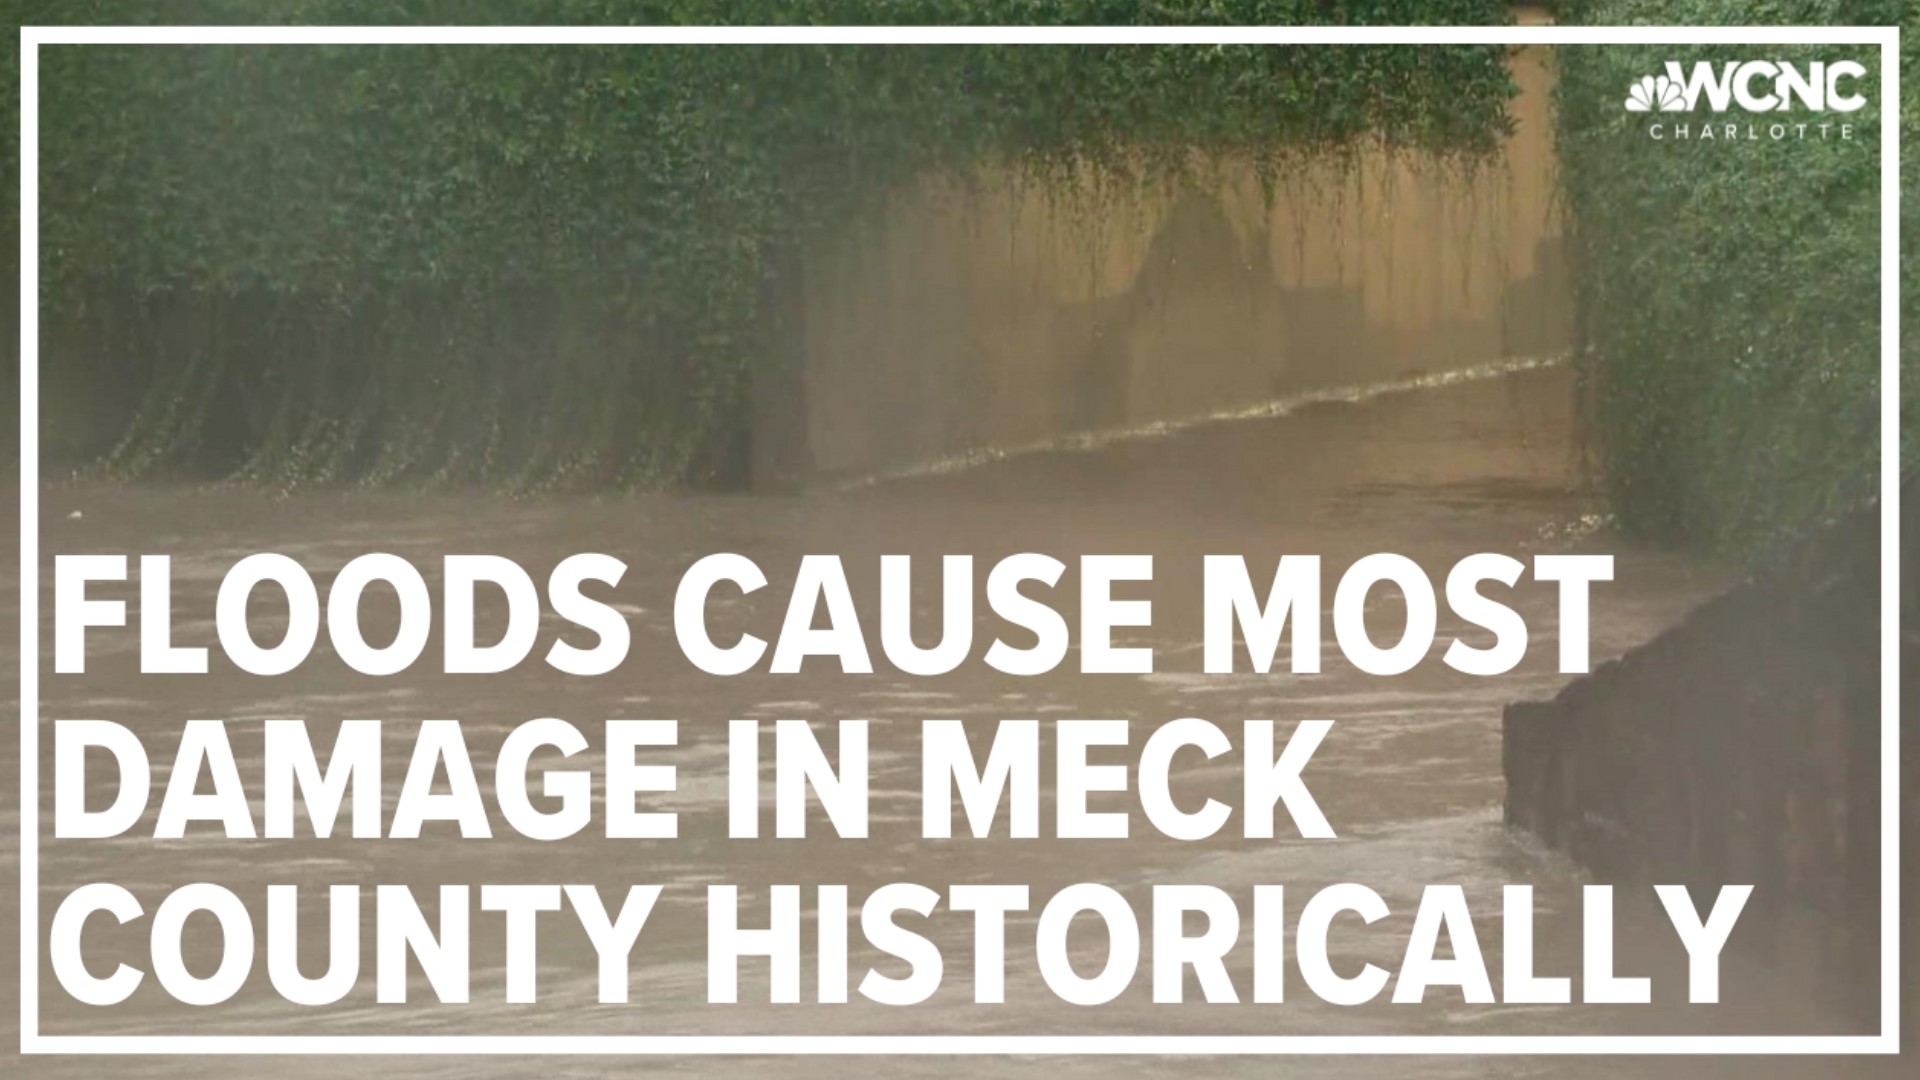 Historically, flash floods and floods have caused the most property damage and among the most deaths when it comes to severe weather in Mecklenburg County.